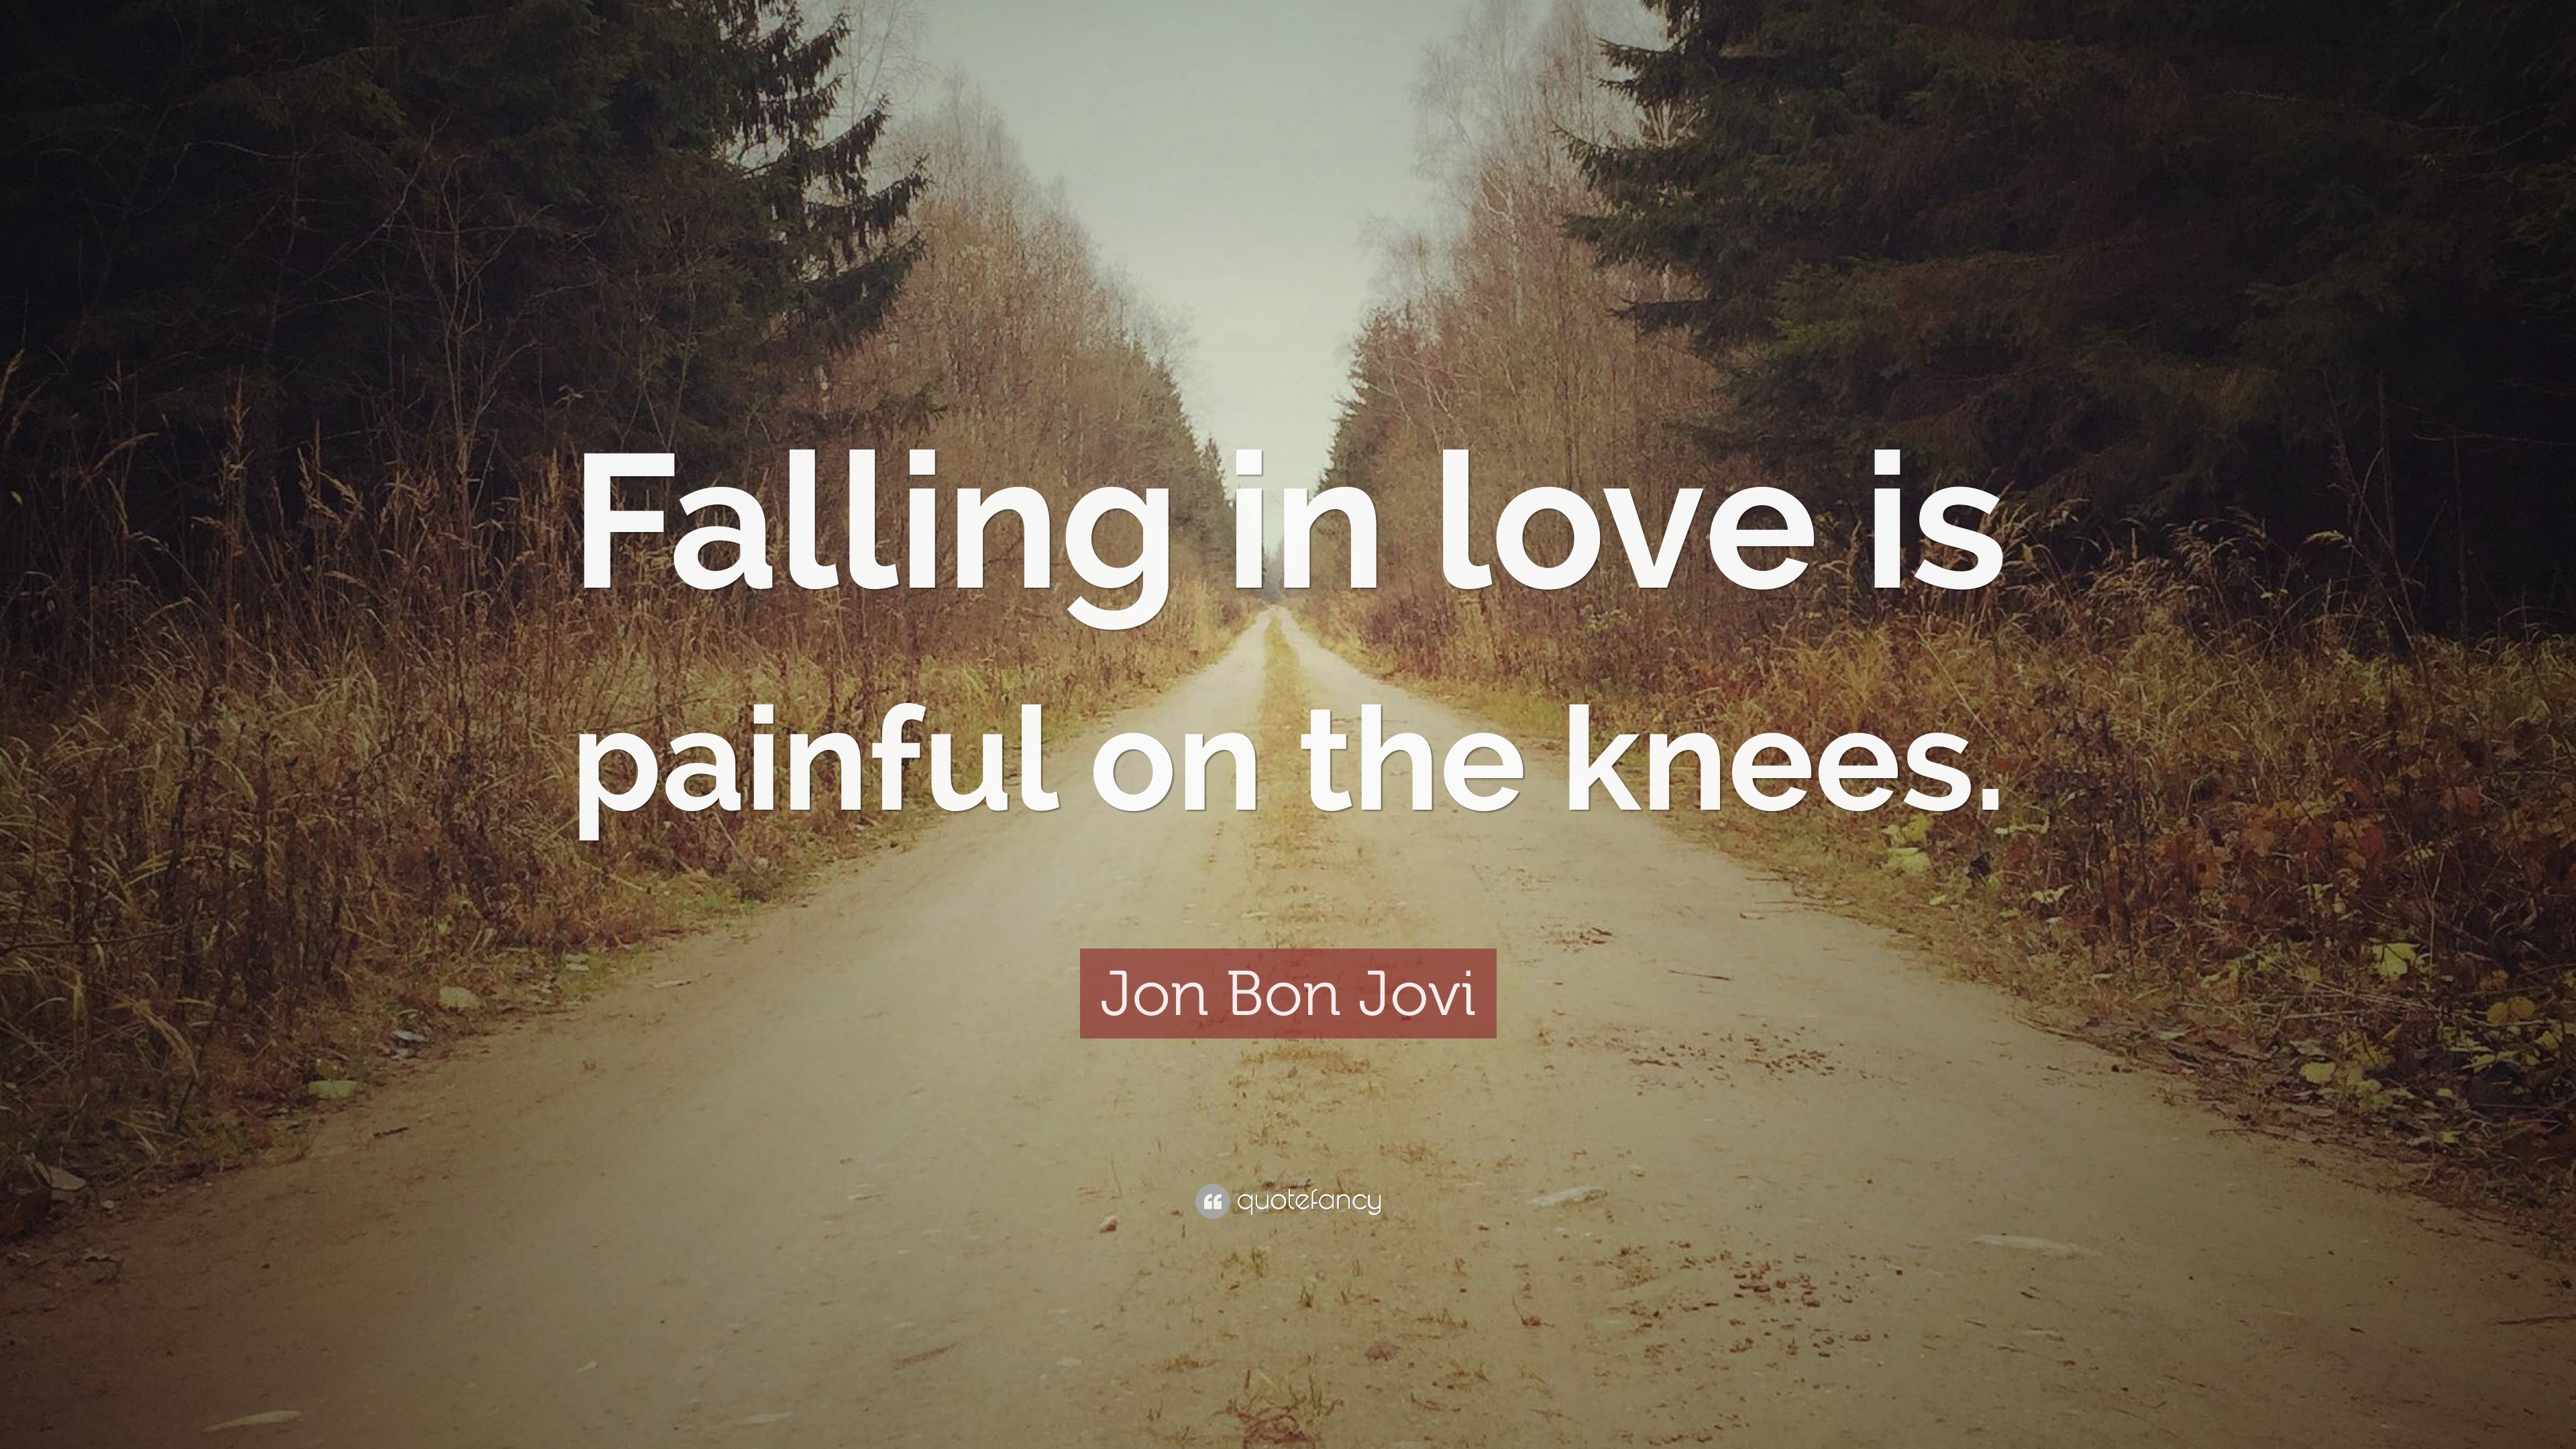 Jon Bon Jovi Quote “Falling in love is painful on the knees ”